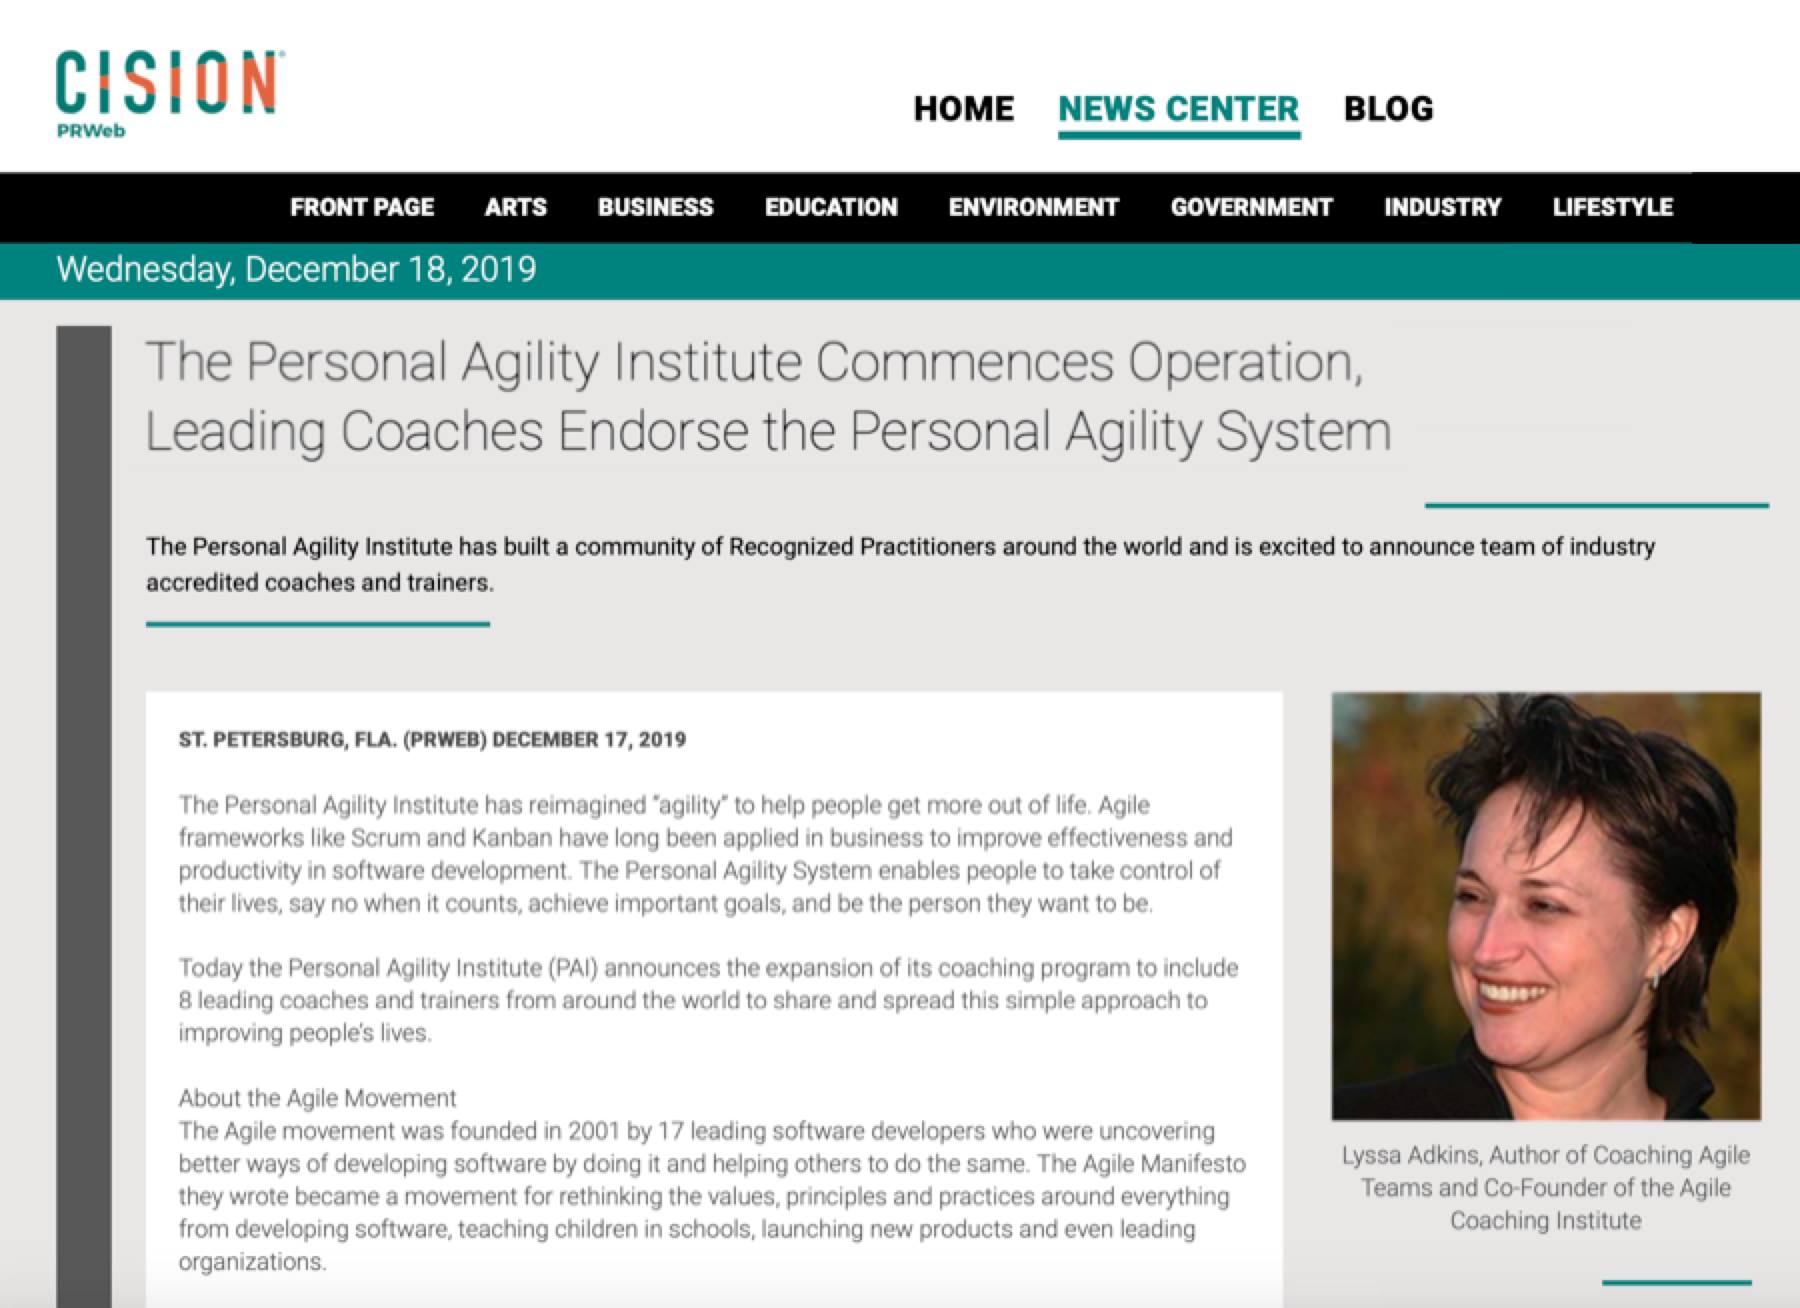 Press Release: The Personal Agility Institute Commences Operation, Leading Coaches Endorse the Personal Agility System